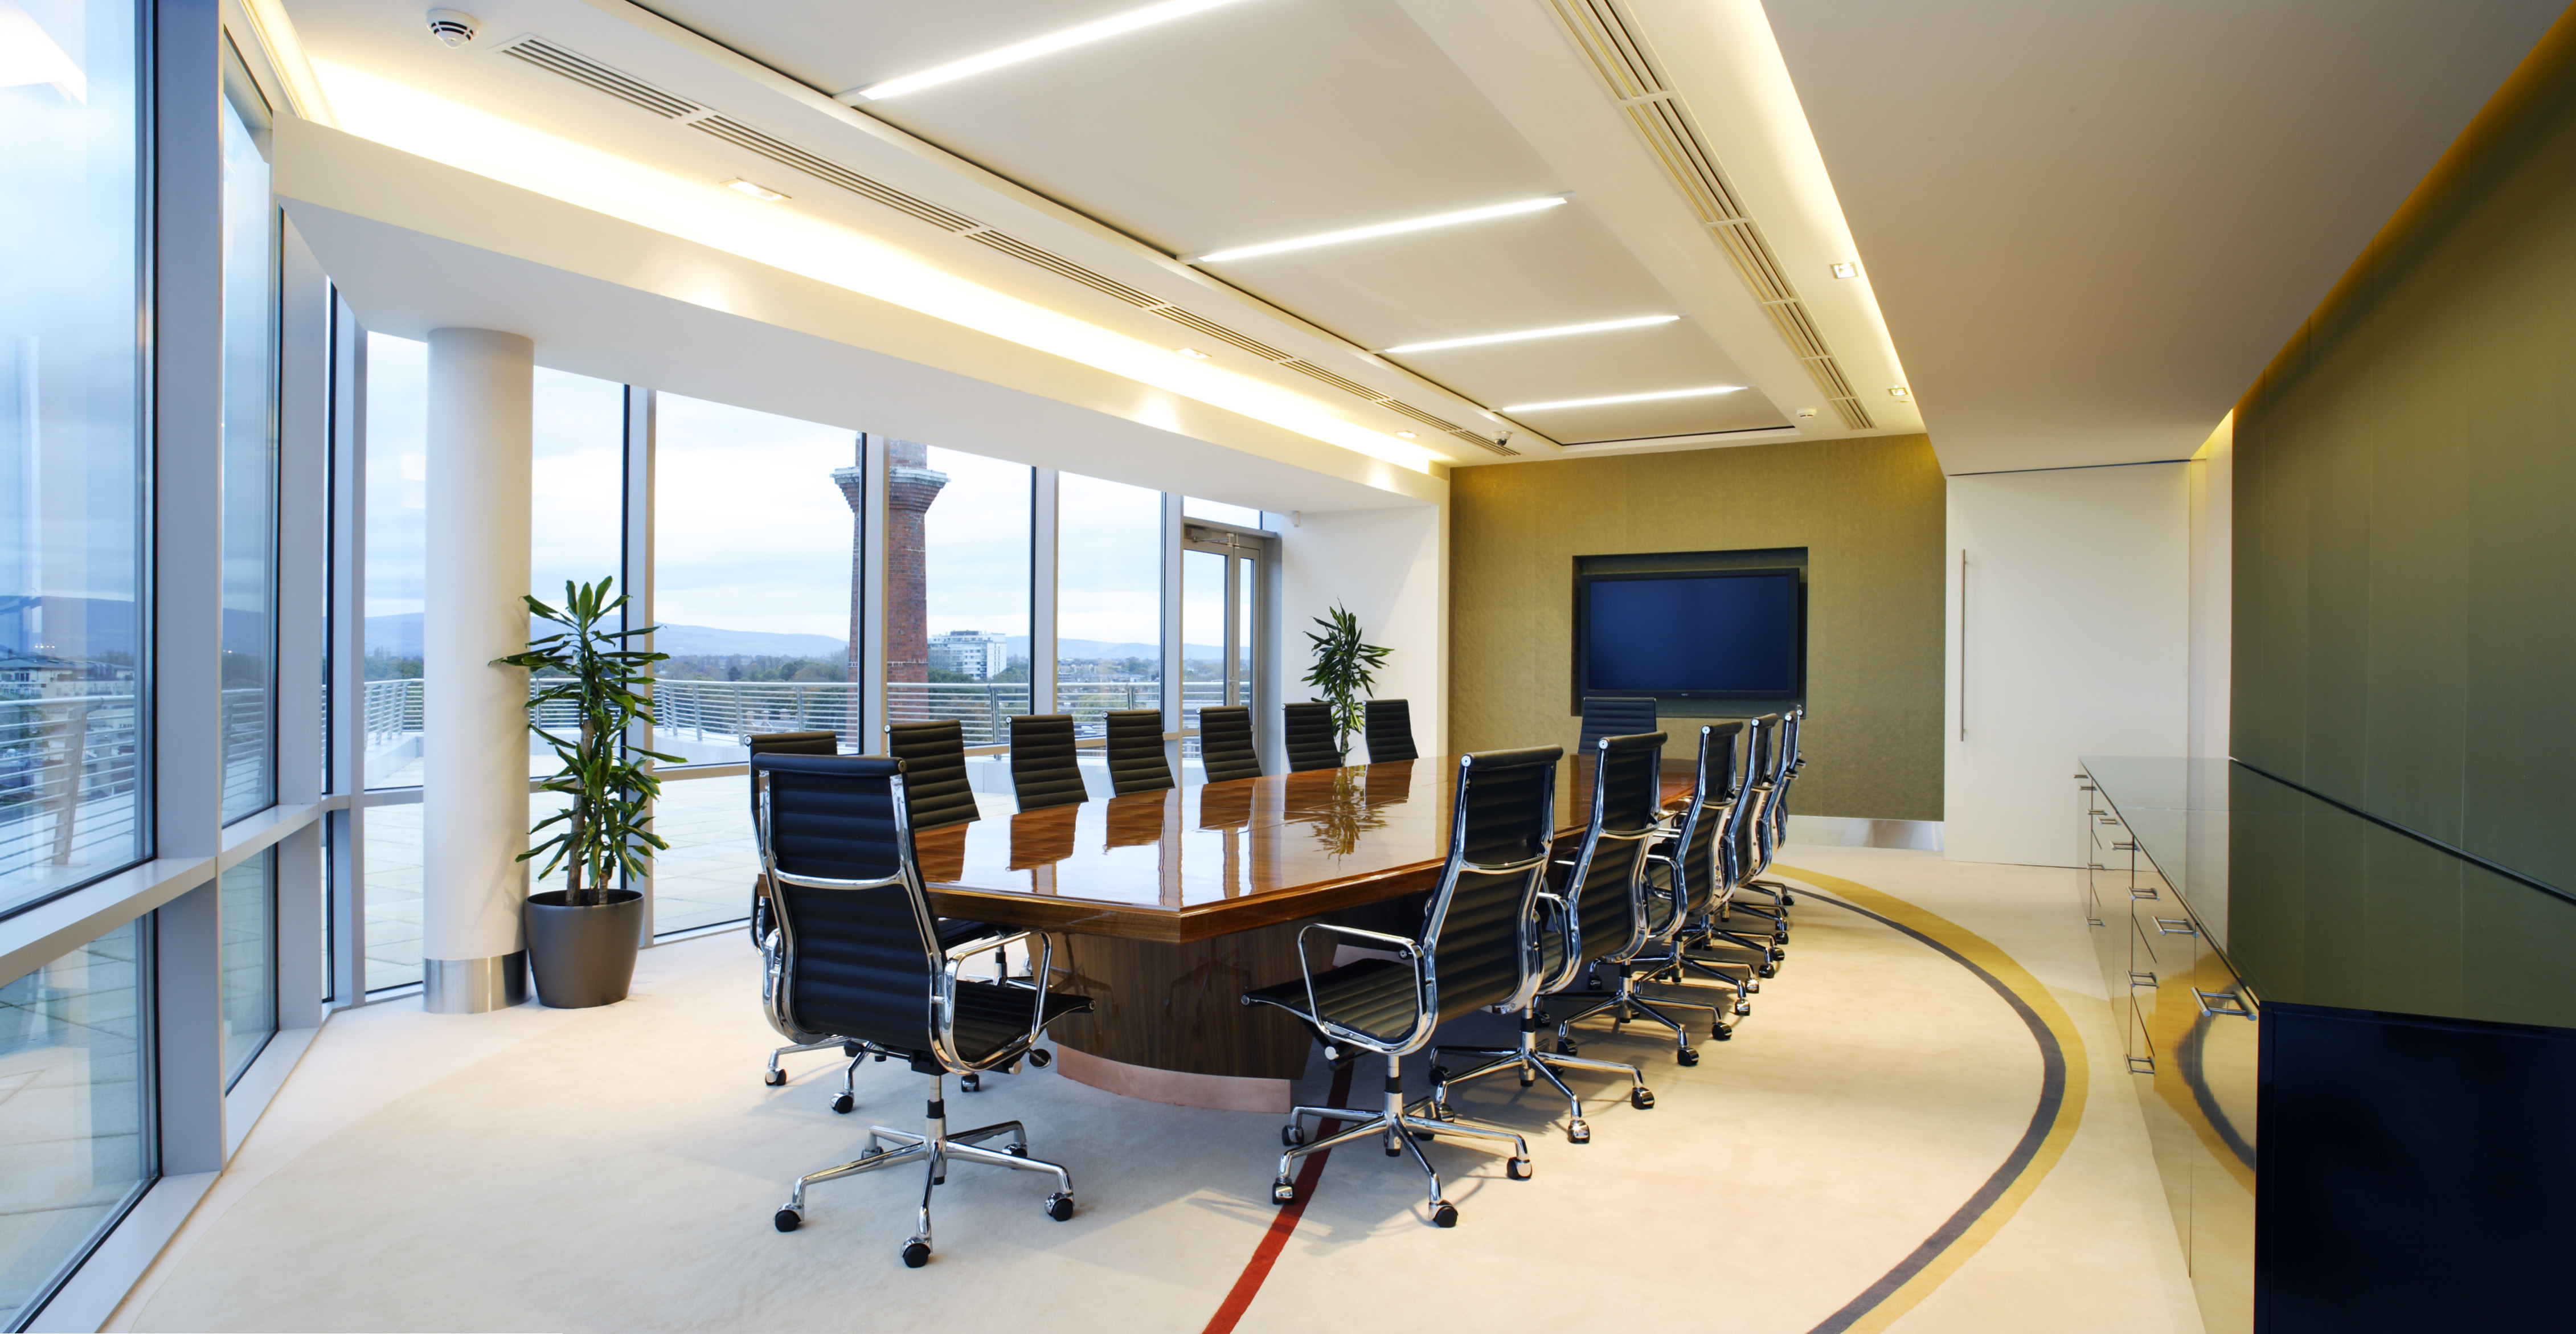 Business Interiors For Your Corporate Headquarters